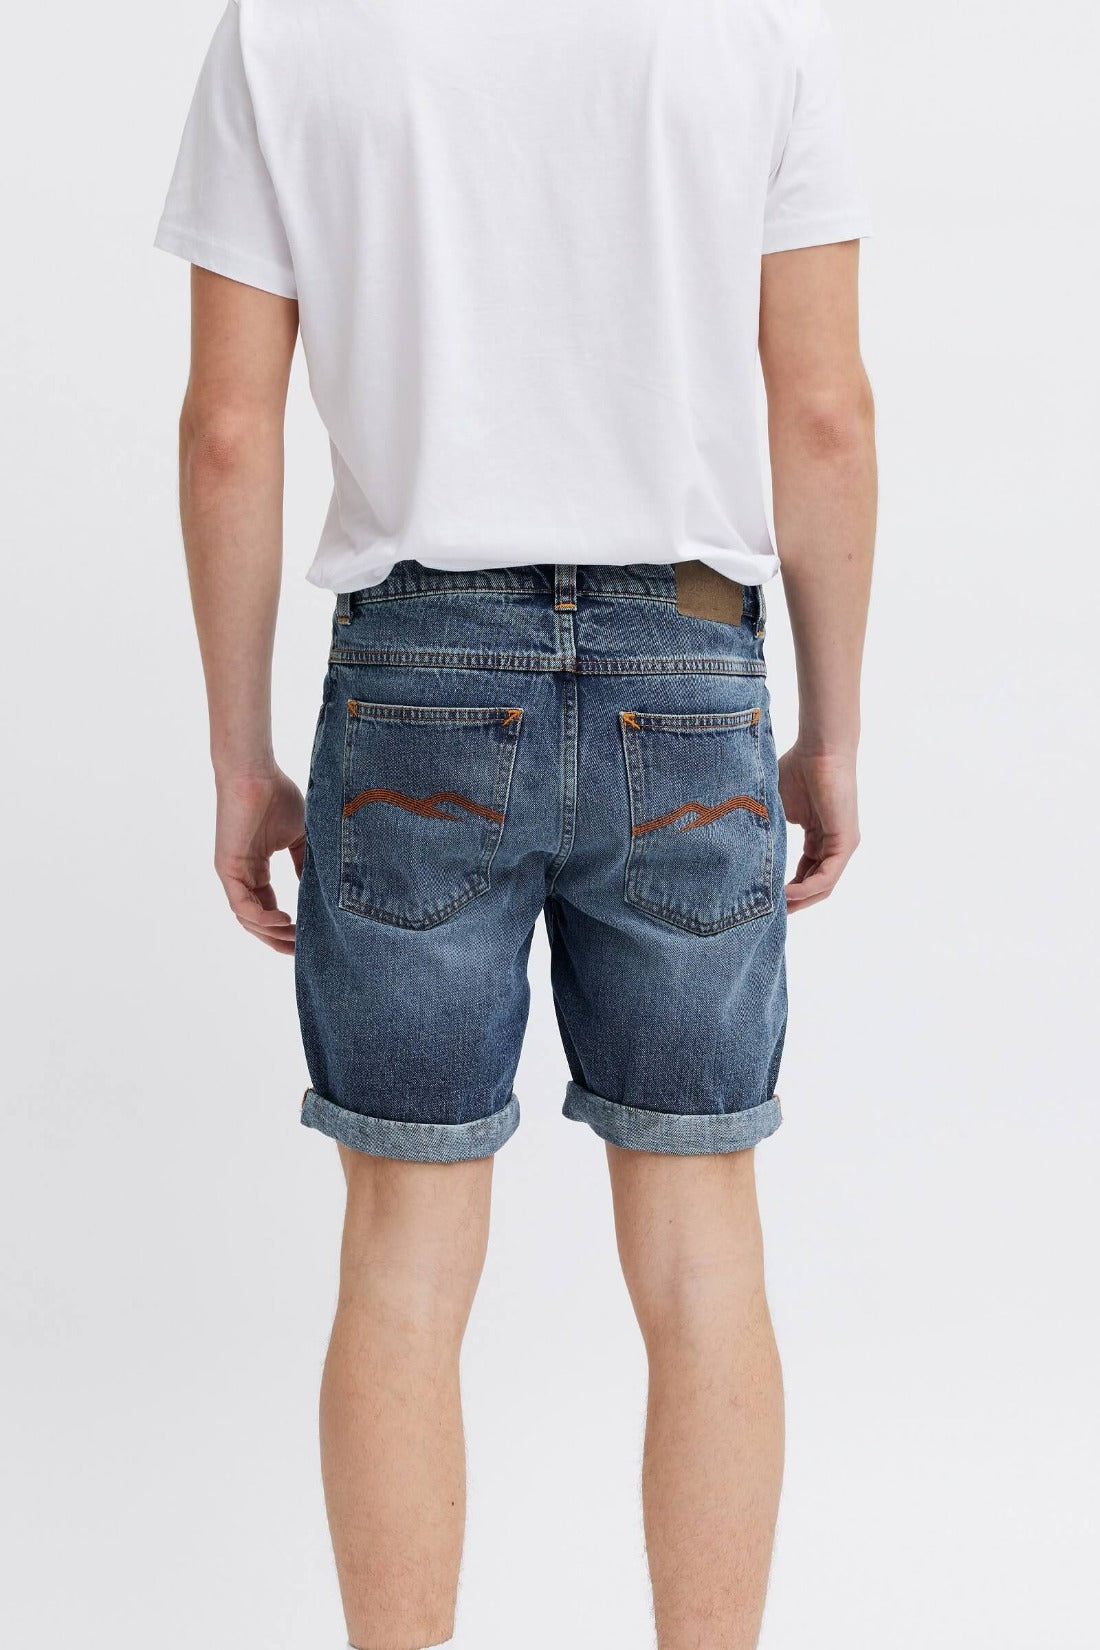 ethical denim shorts. roots 